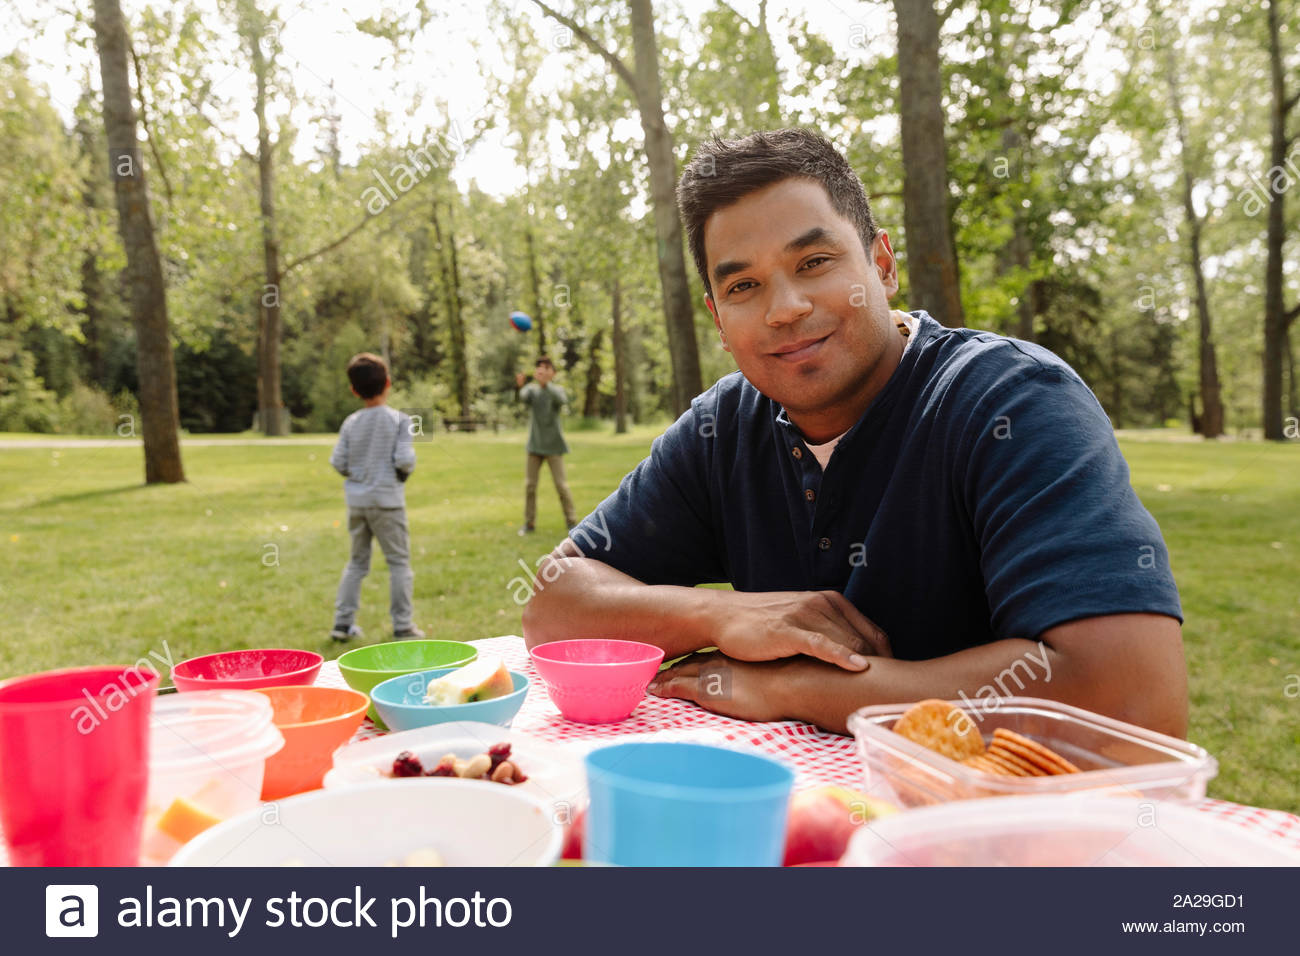 Portrait of man having picnic in park with boys playing in background Stock Photo